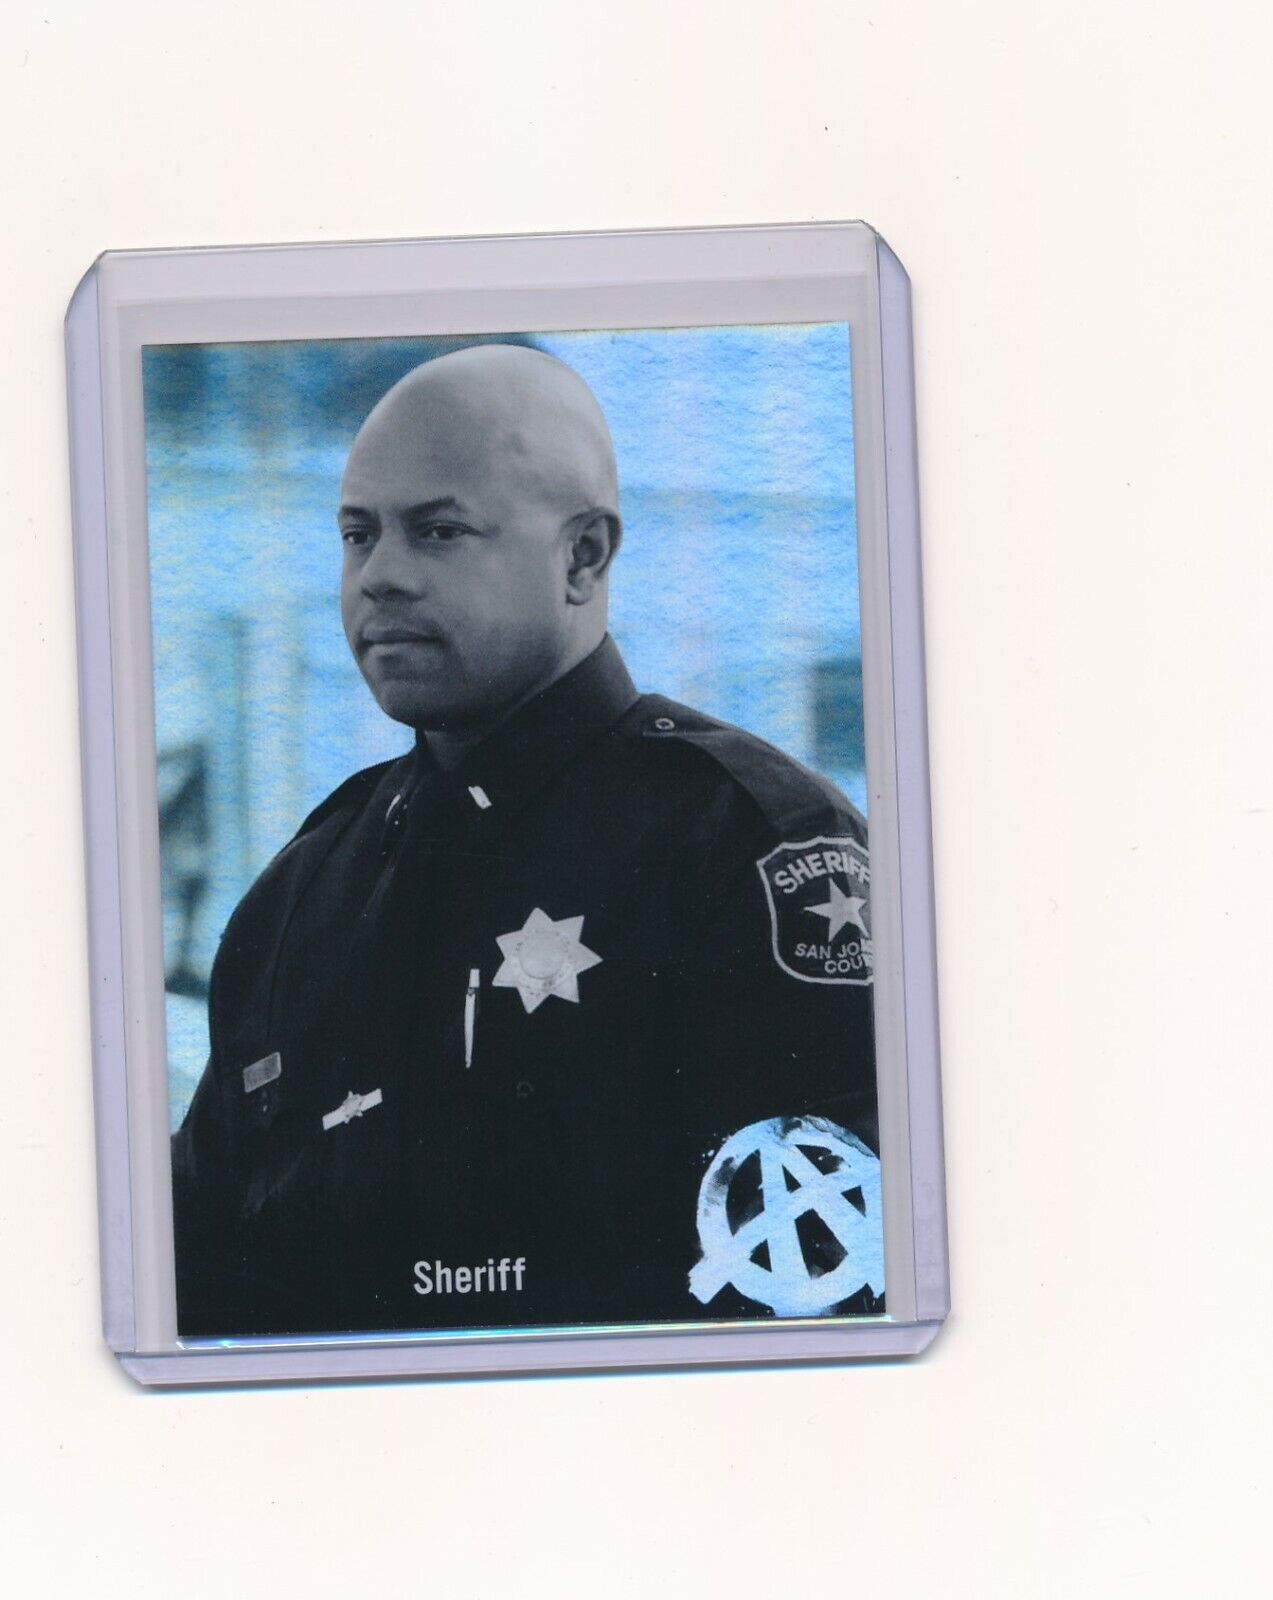 2015 Cryptozoic Sons of Anarchy Seasons 4 & 5 SHERIFF  FOIL CARD 07/25  # C14  